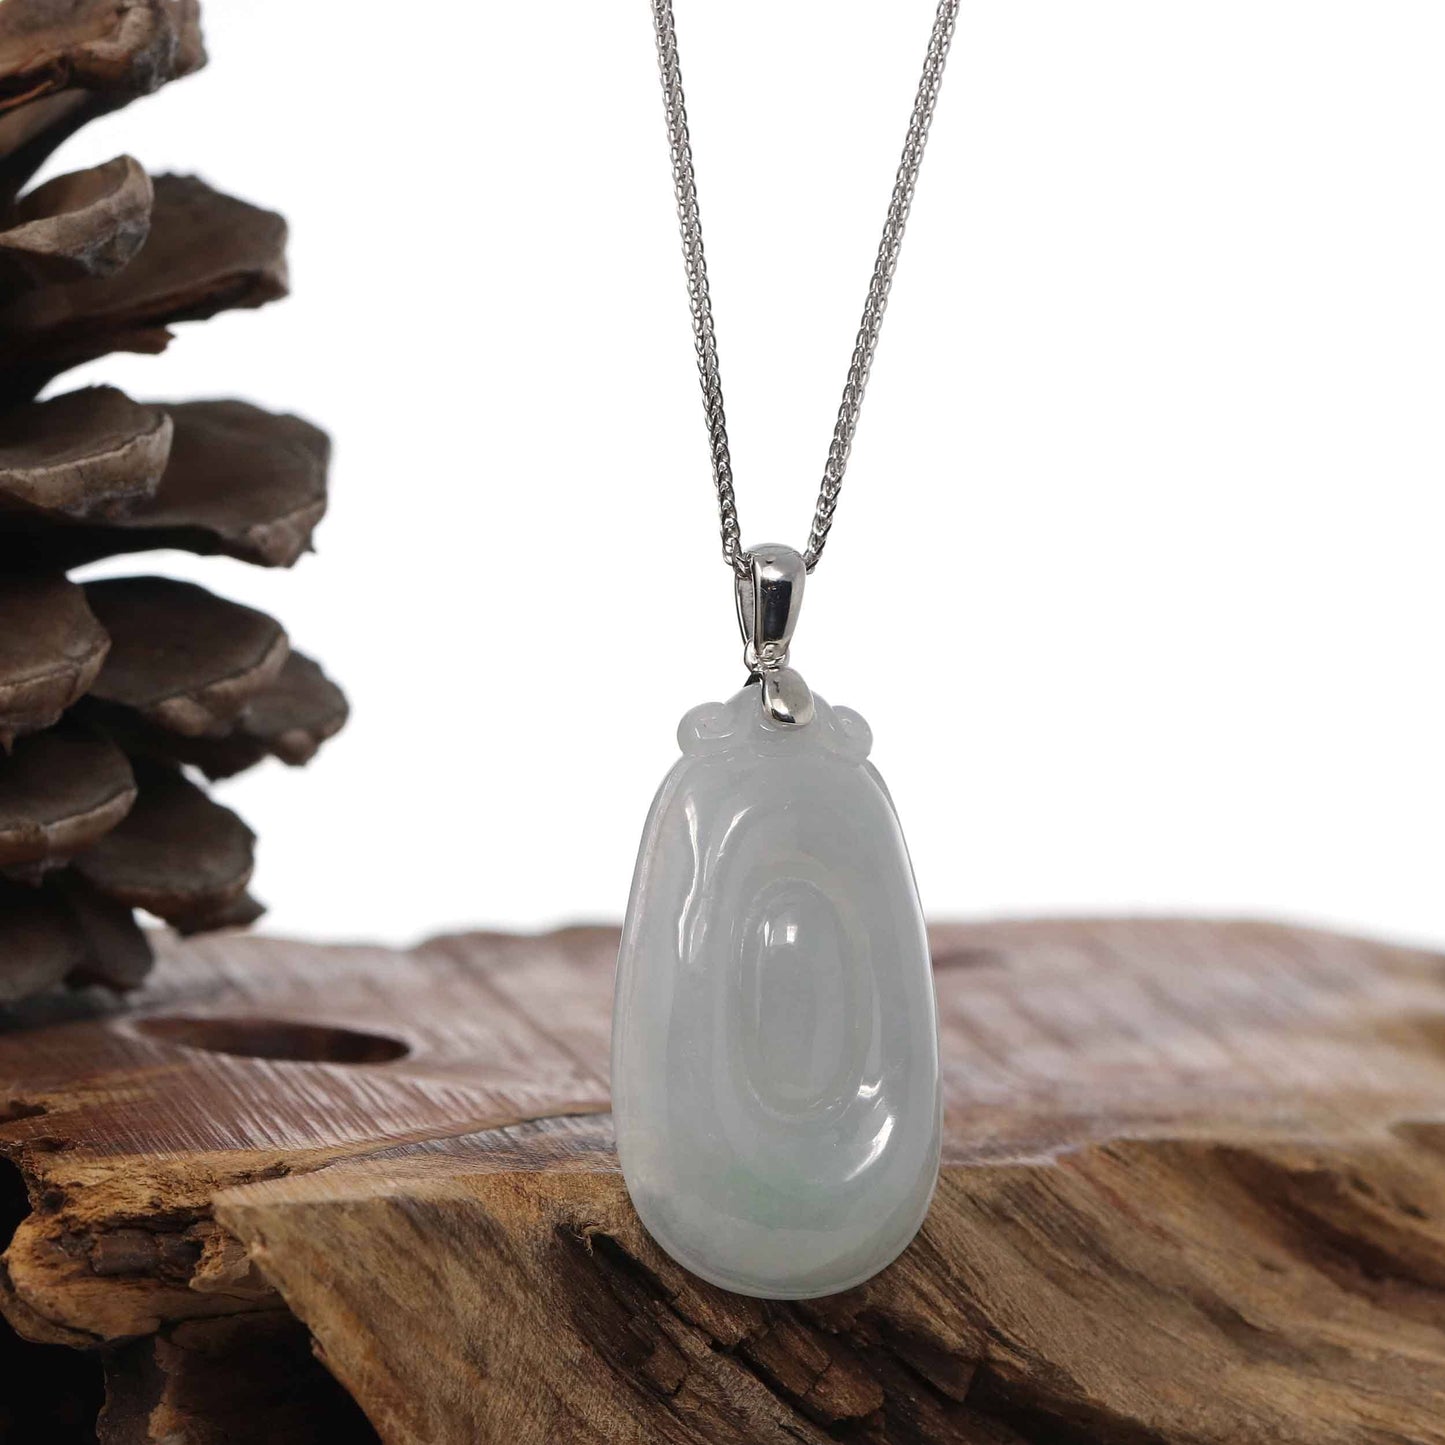 RealJade Co.® Jade Guanyin Pendant Necklace Copy of Natural Light Green Jadeite Jade Fu Bei Pendant Necklace With Sterling Silver Bail